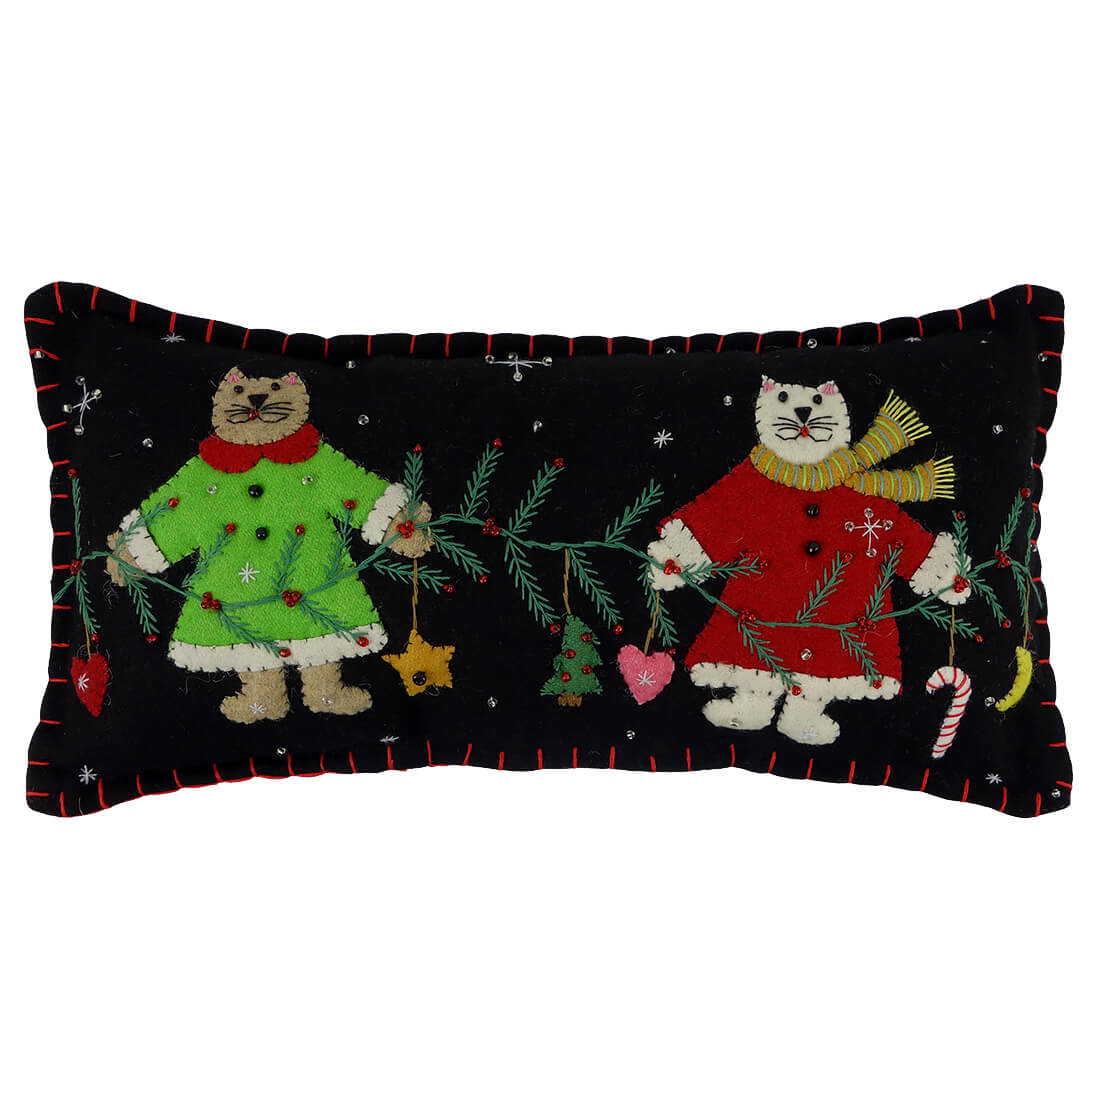 Two Cats with Garland Pillow